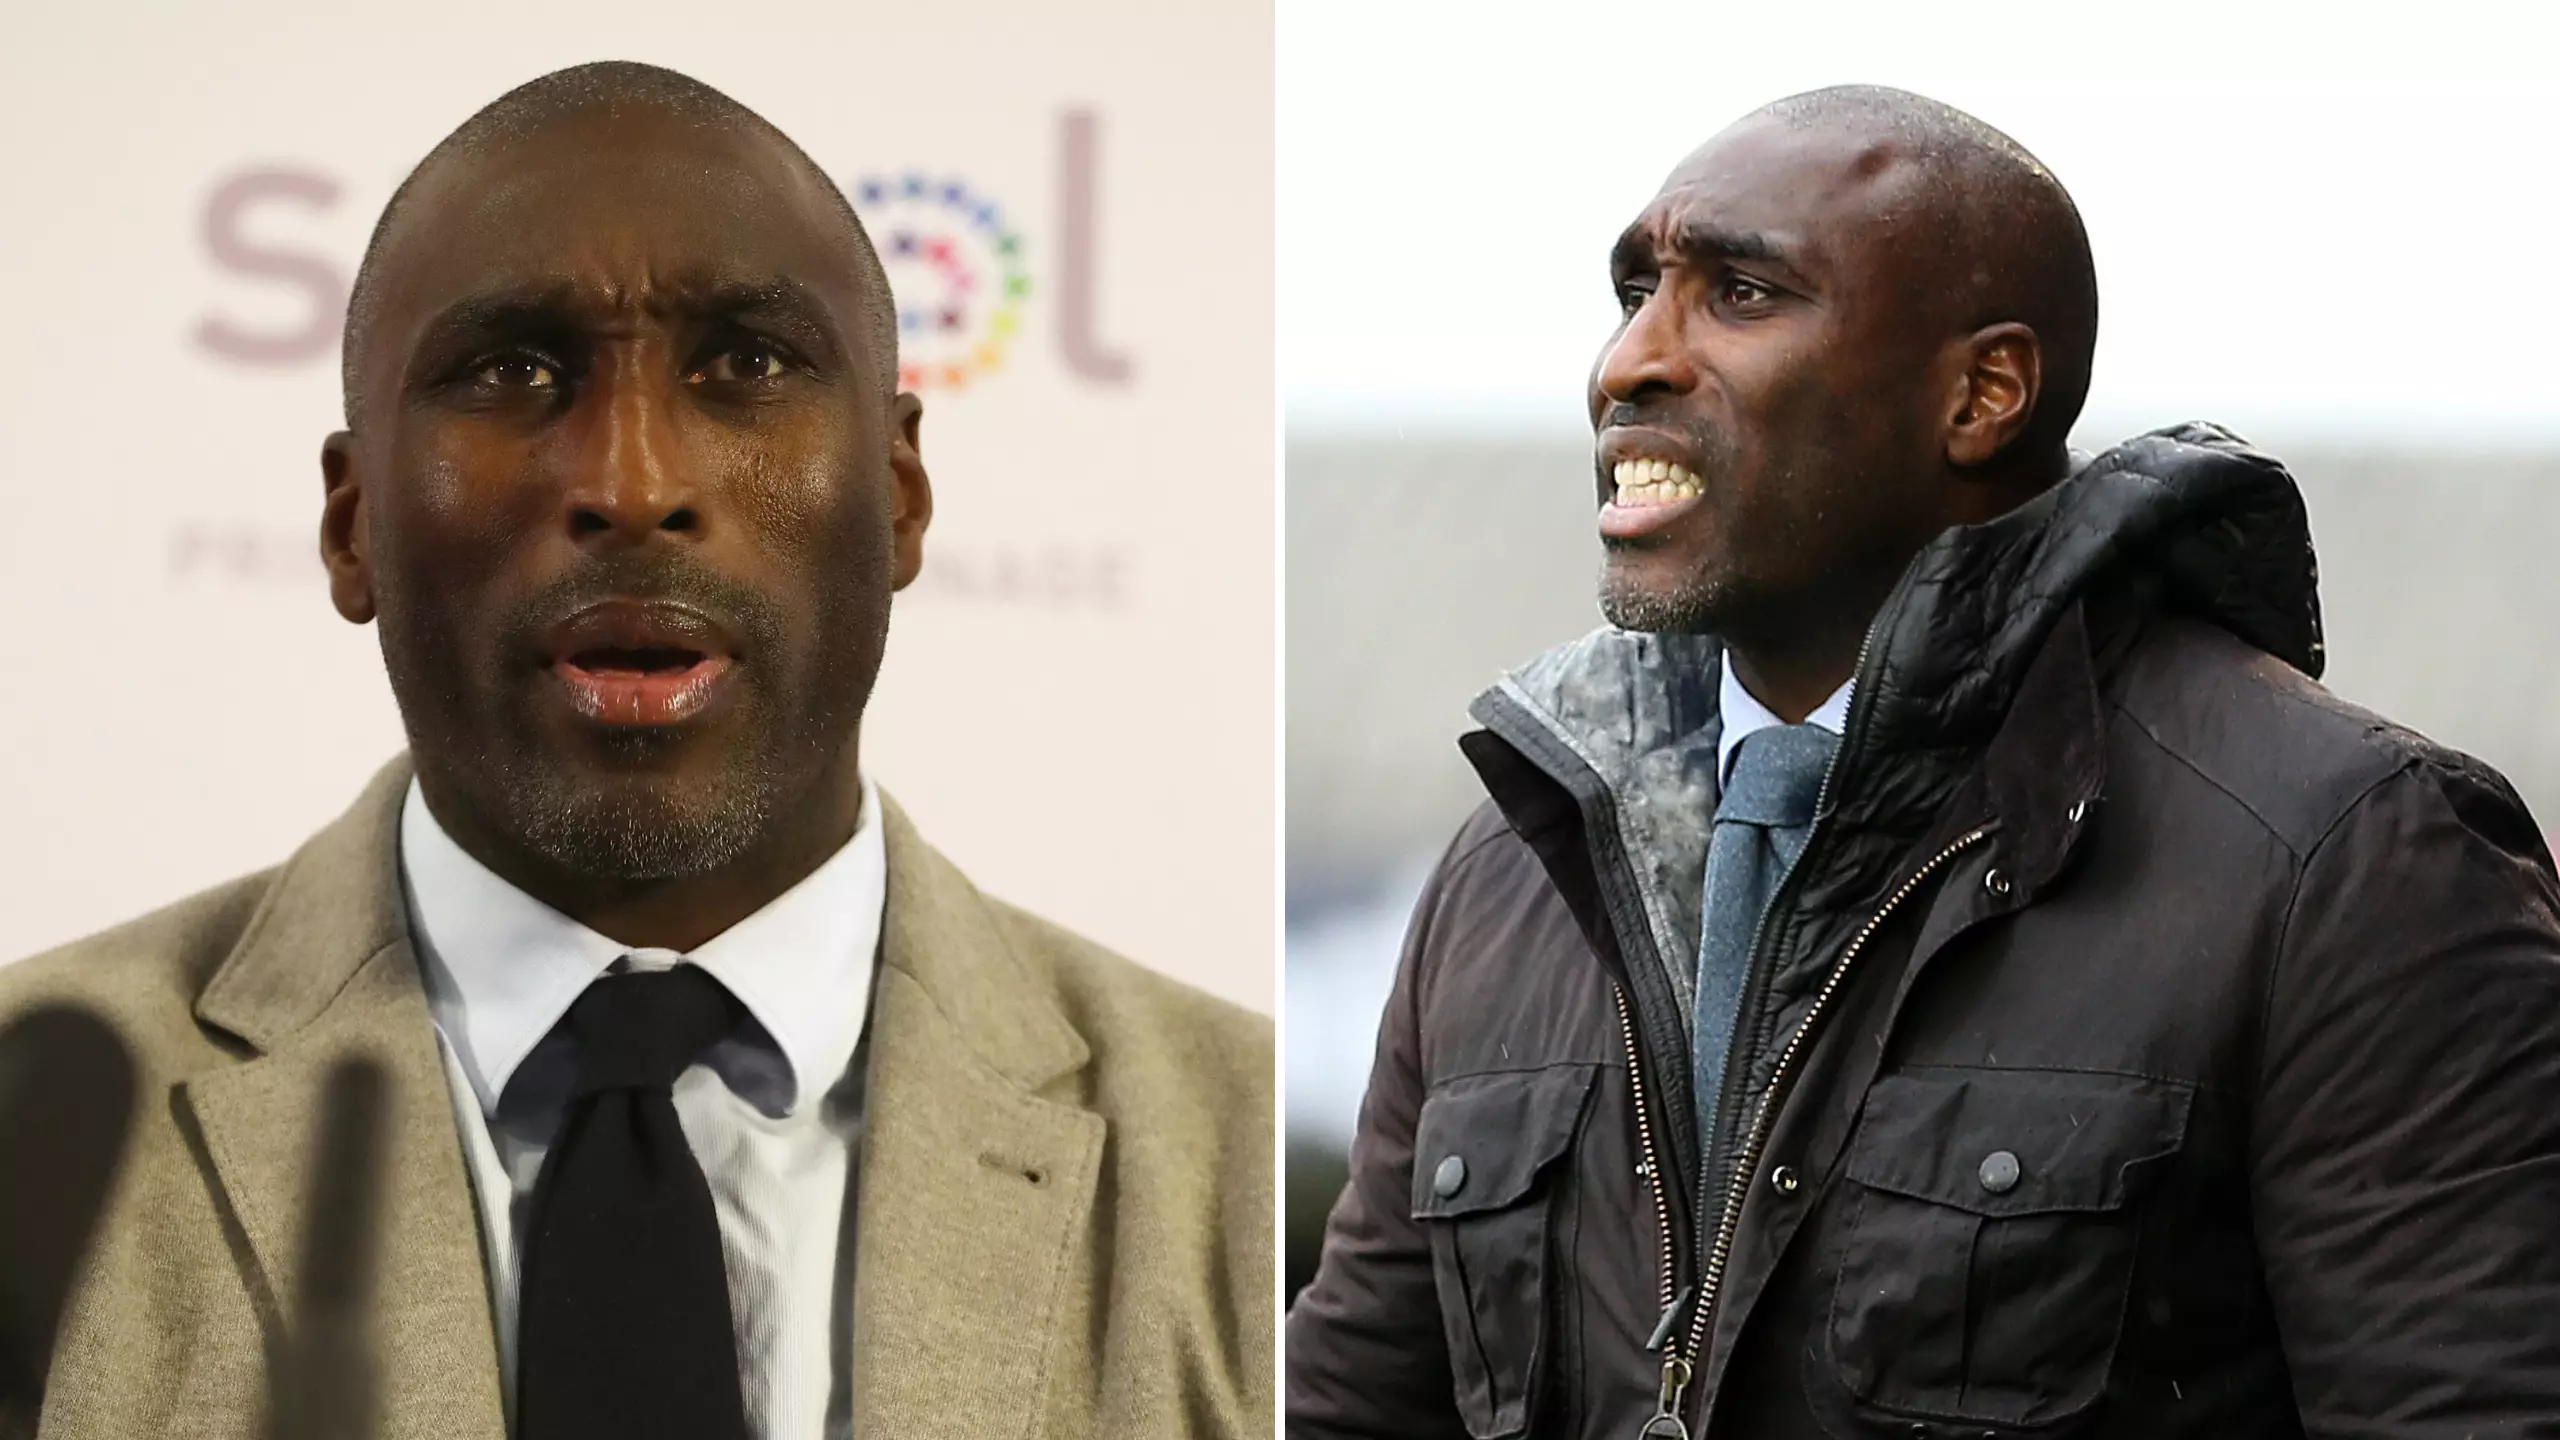 Sol Campbell Thinks Fans Need To Lose 'Archaic' Attitudes To Non-White Managers